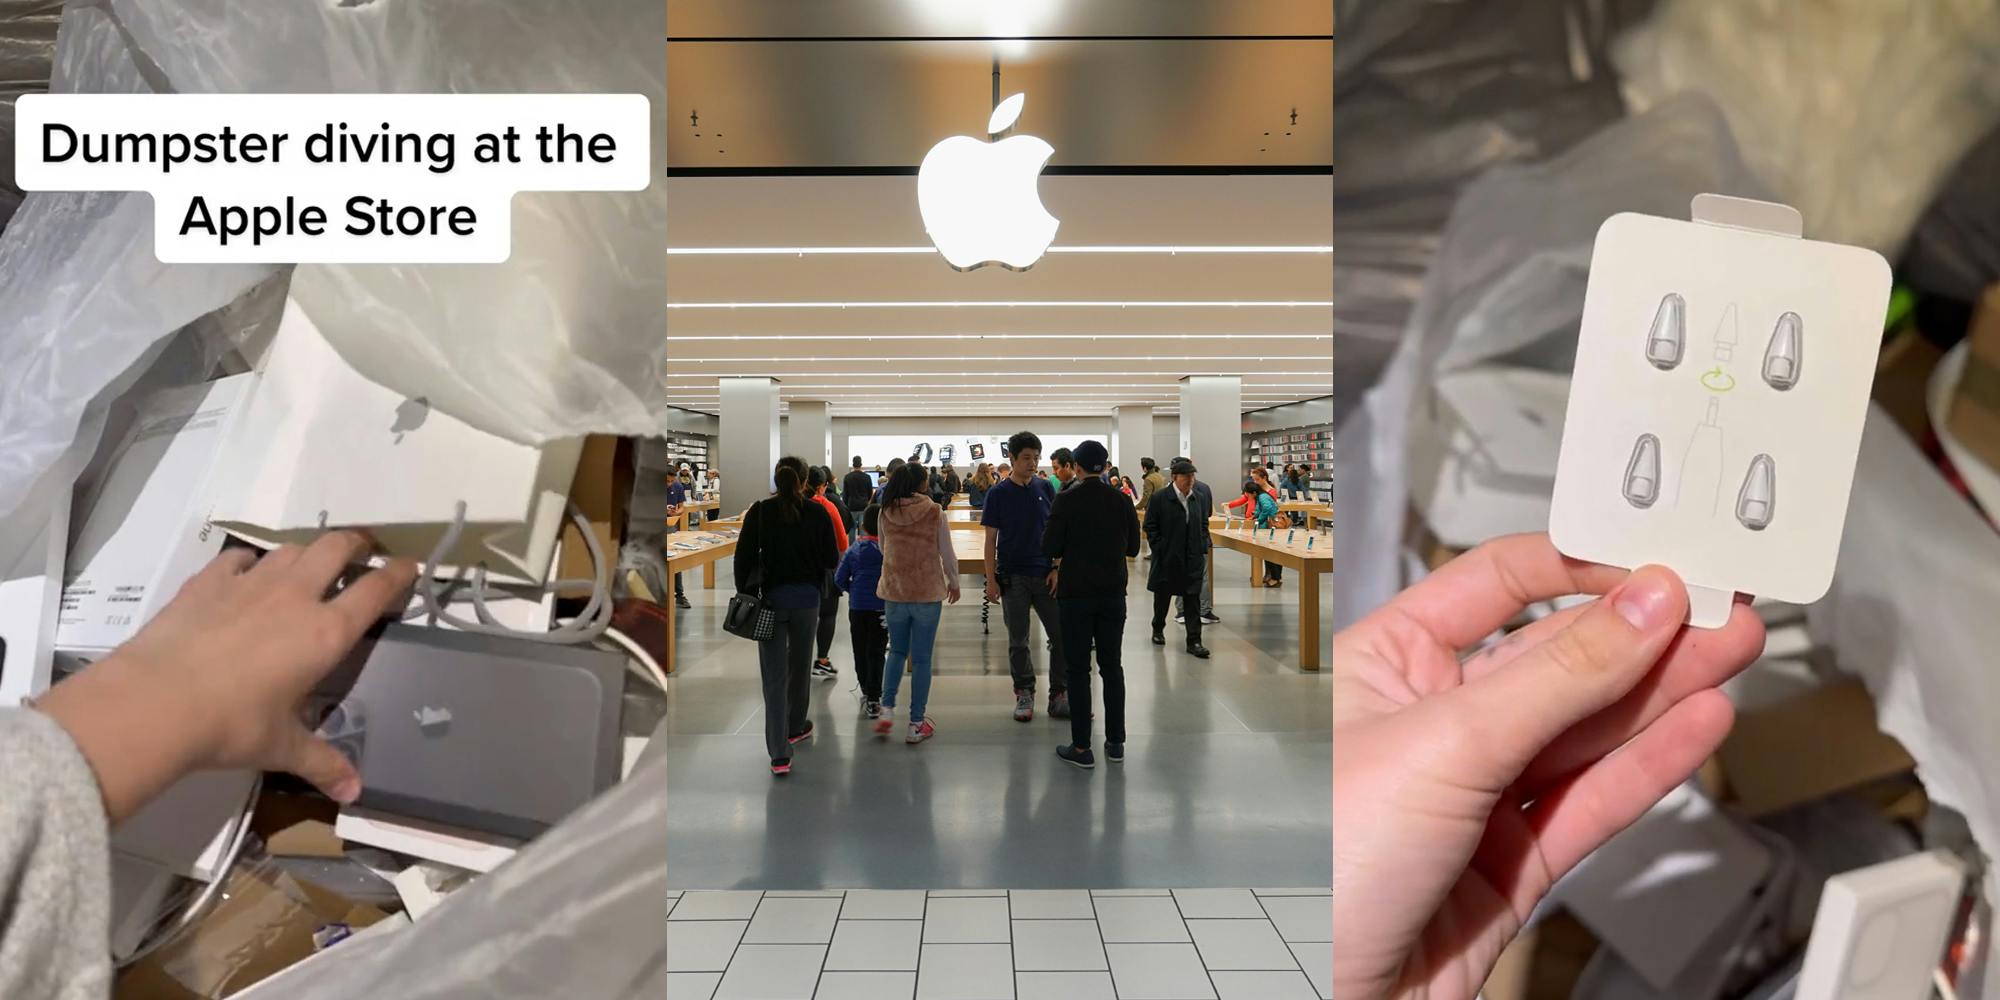 woman hand in dumpster bag at Apple store caption "Dumpster diving at the Apple Store" (l) people inside Apple store (c) woman holding up Apple pen tips brand new (r)